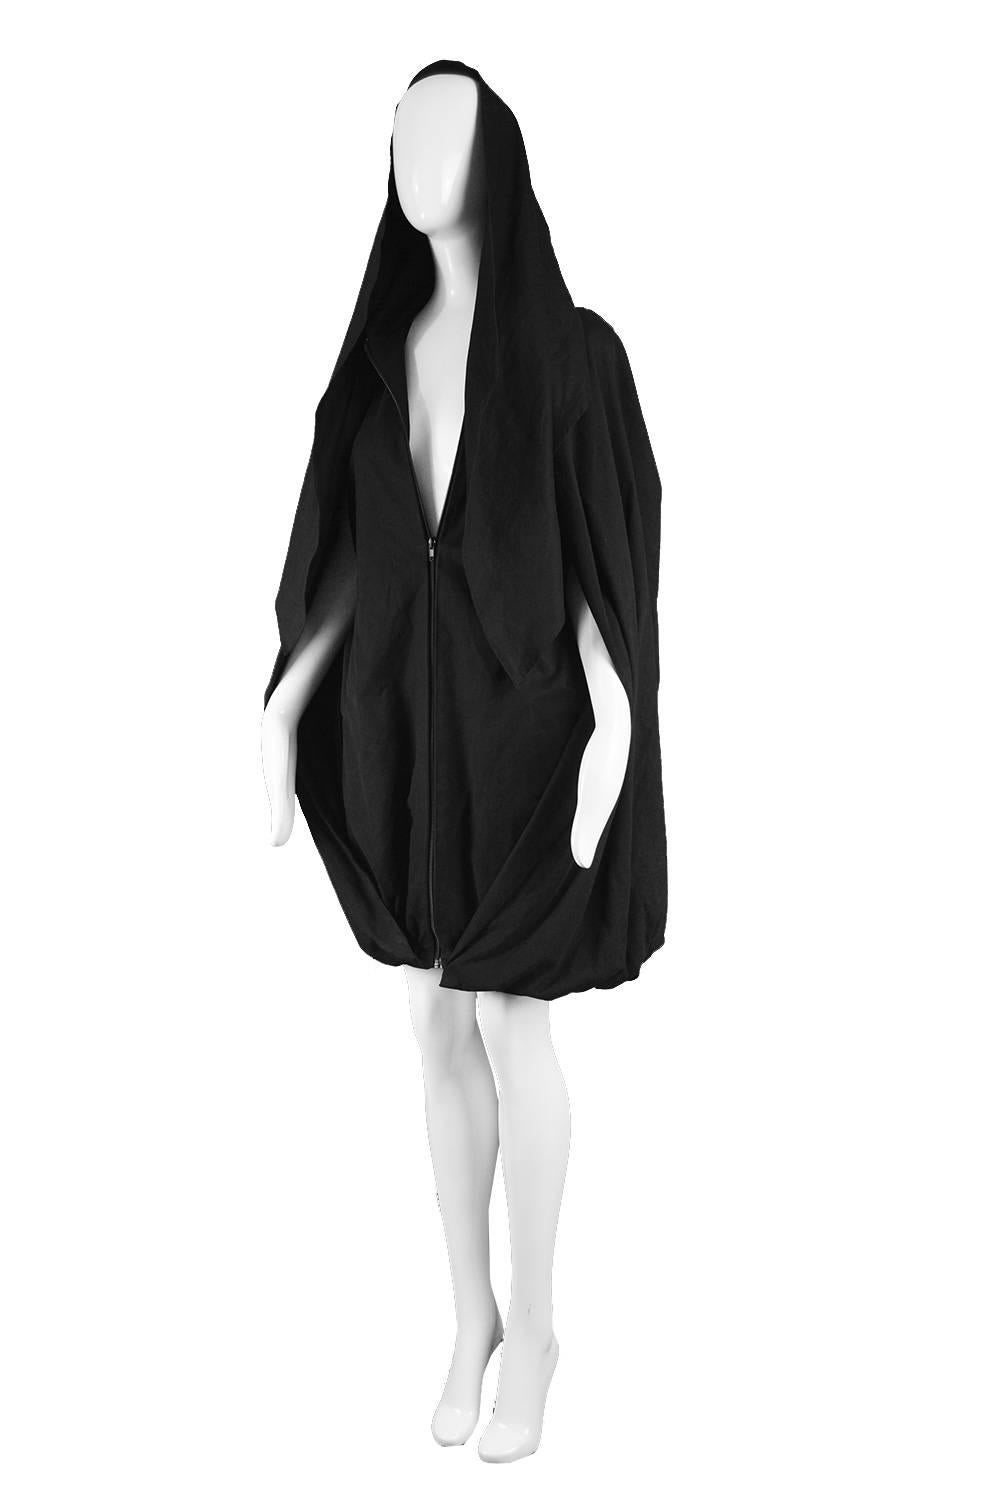 Sybilla Vintage 1980s Avant Garde Black Cocoon Cape Back Zip Front Coat Dress

Size: fits roughly like a modern women's Small to Medium, as it has a dress design under the cape that can be worn loosely or more fitted. Please check measurements
Bust